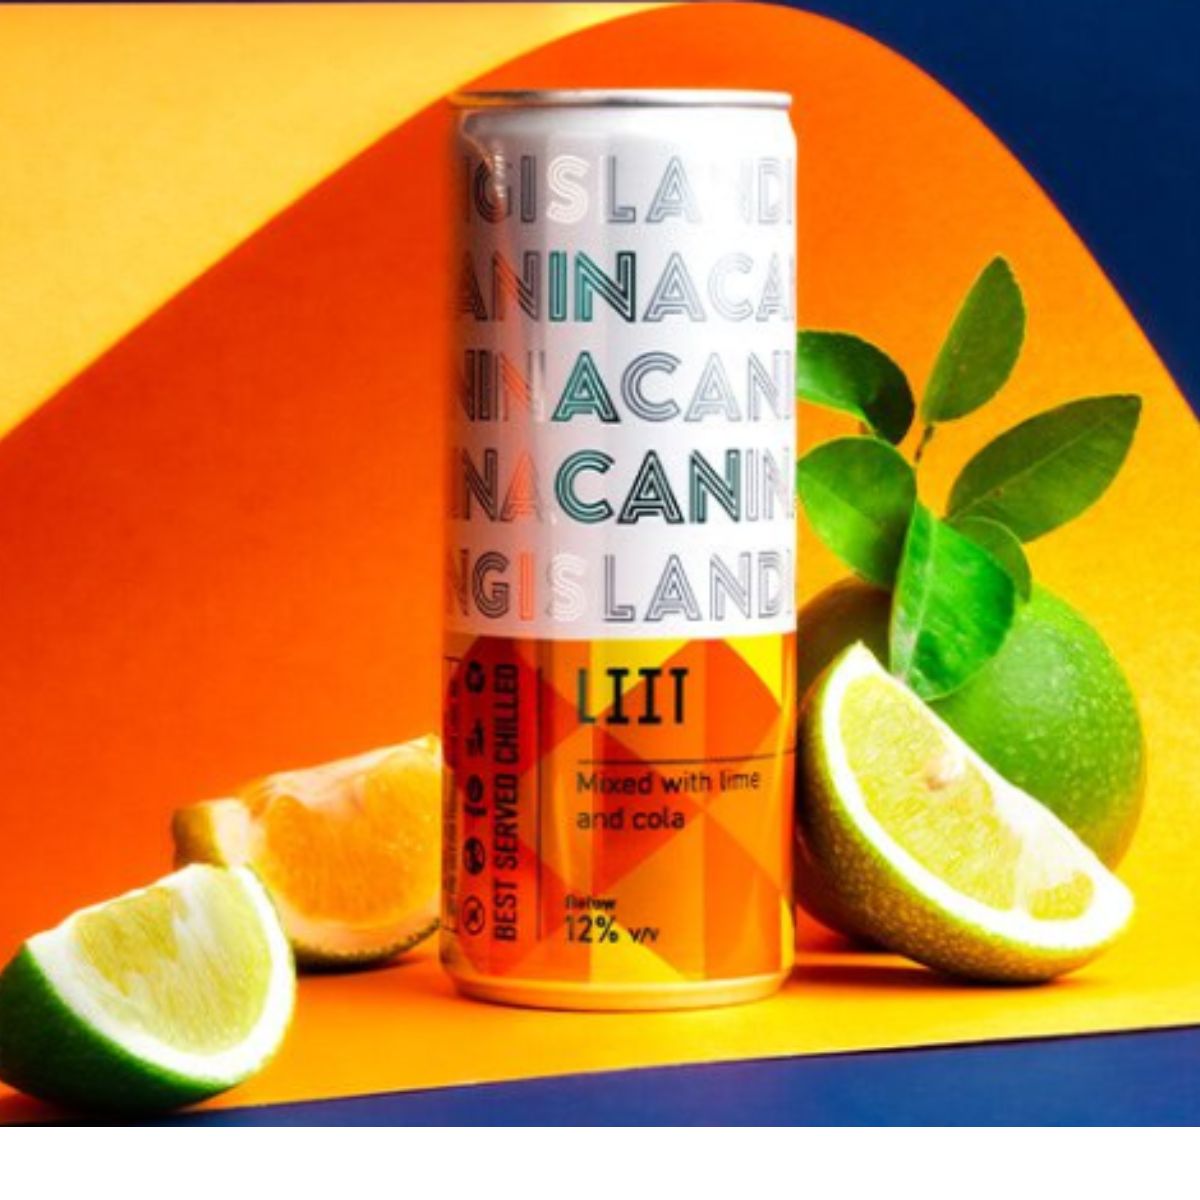 Inacan - Liit Mixed with Lime and Cola - 250ml